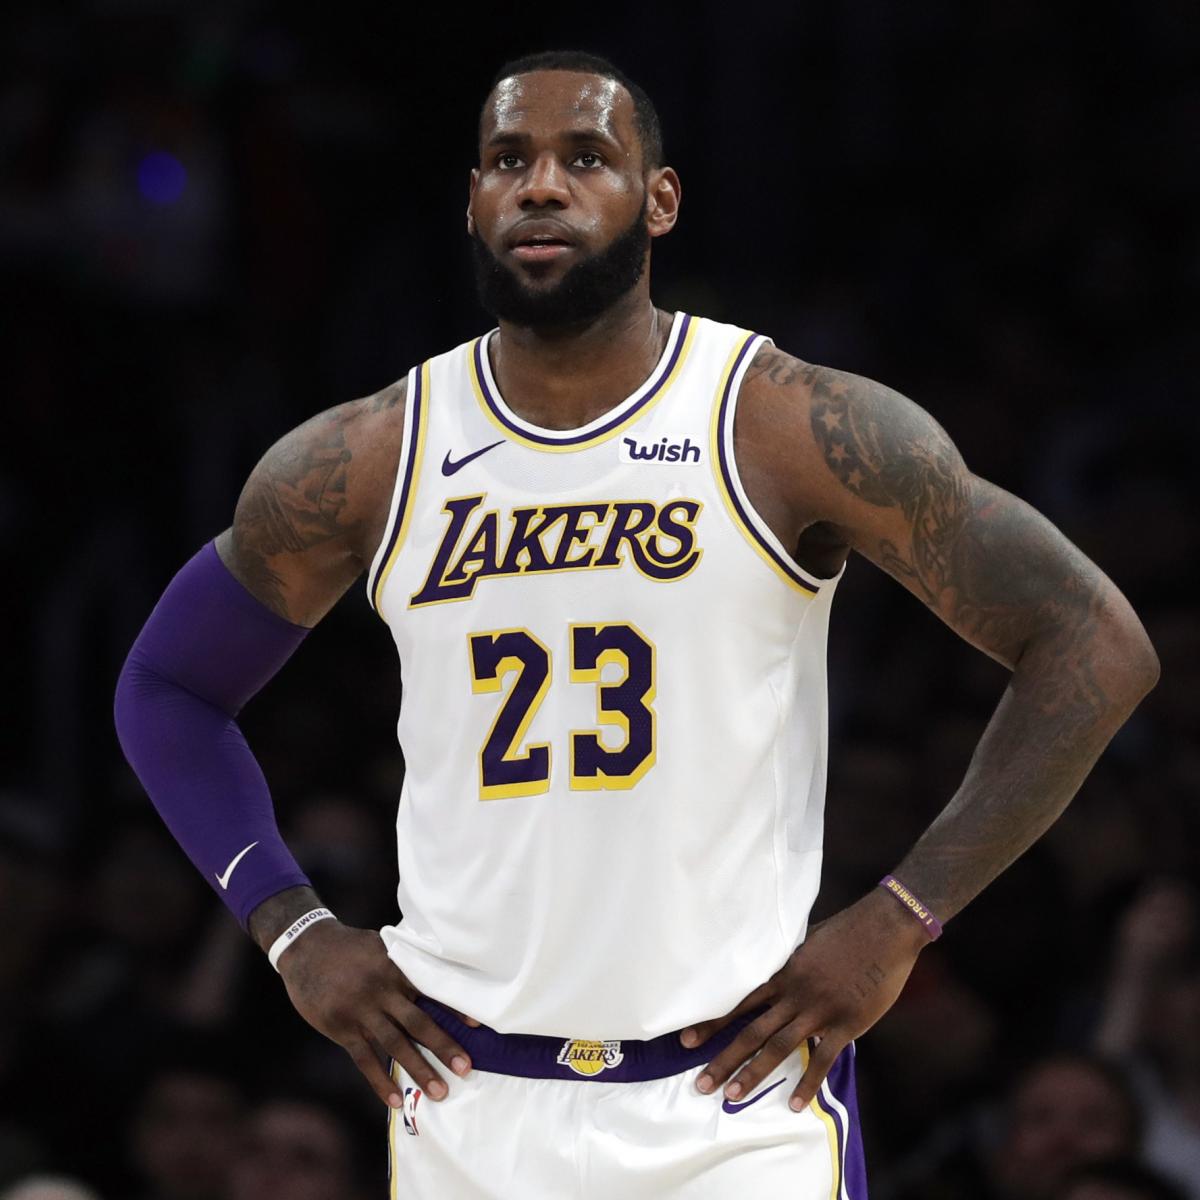 NBA All-Star Rosters 2019: List of Captains, Starters, Predictions for Reserves ...